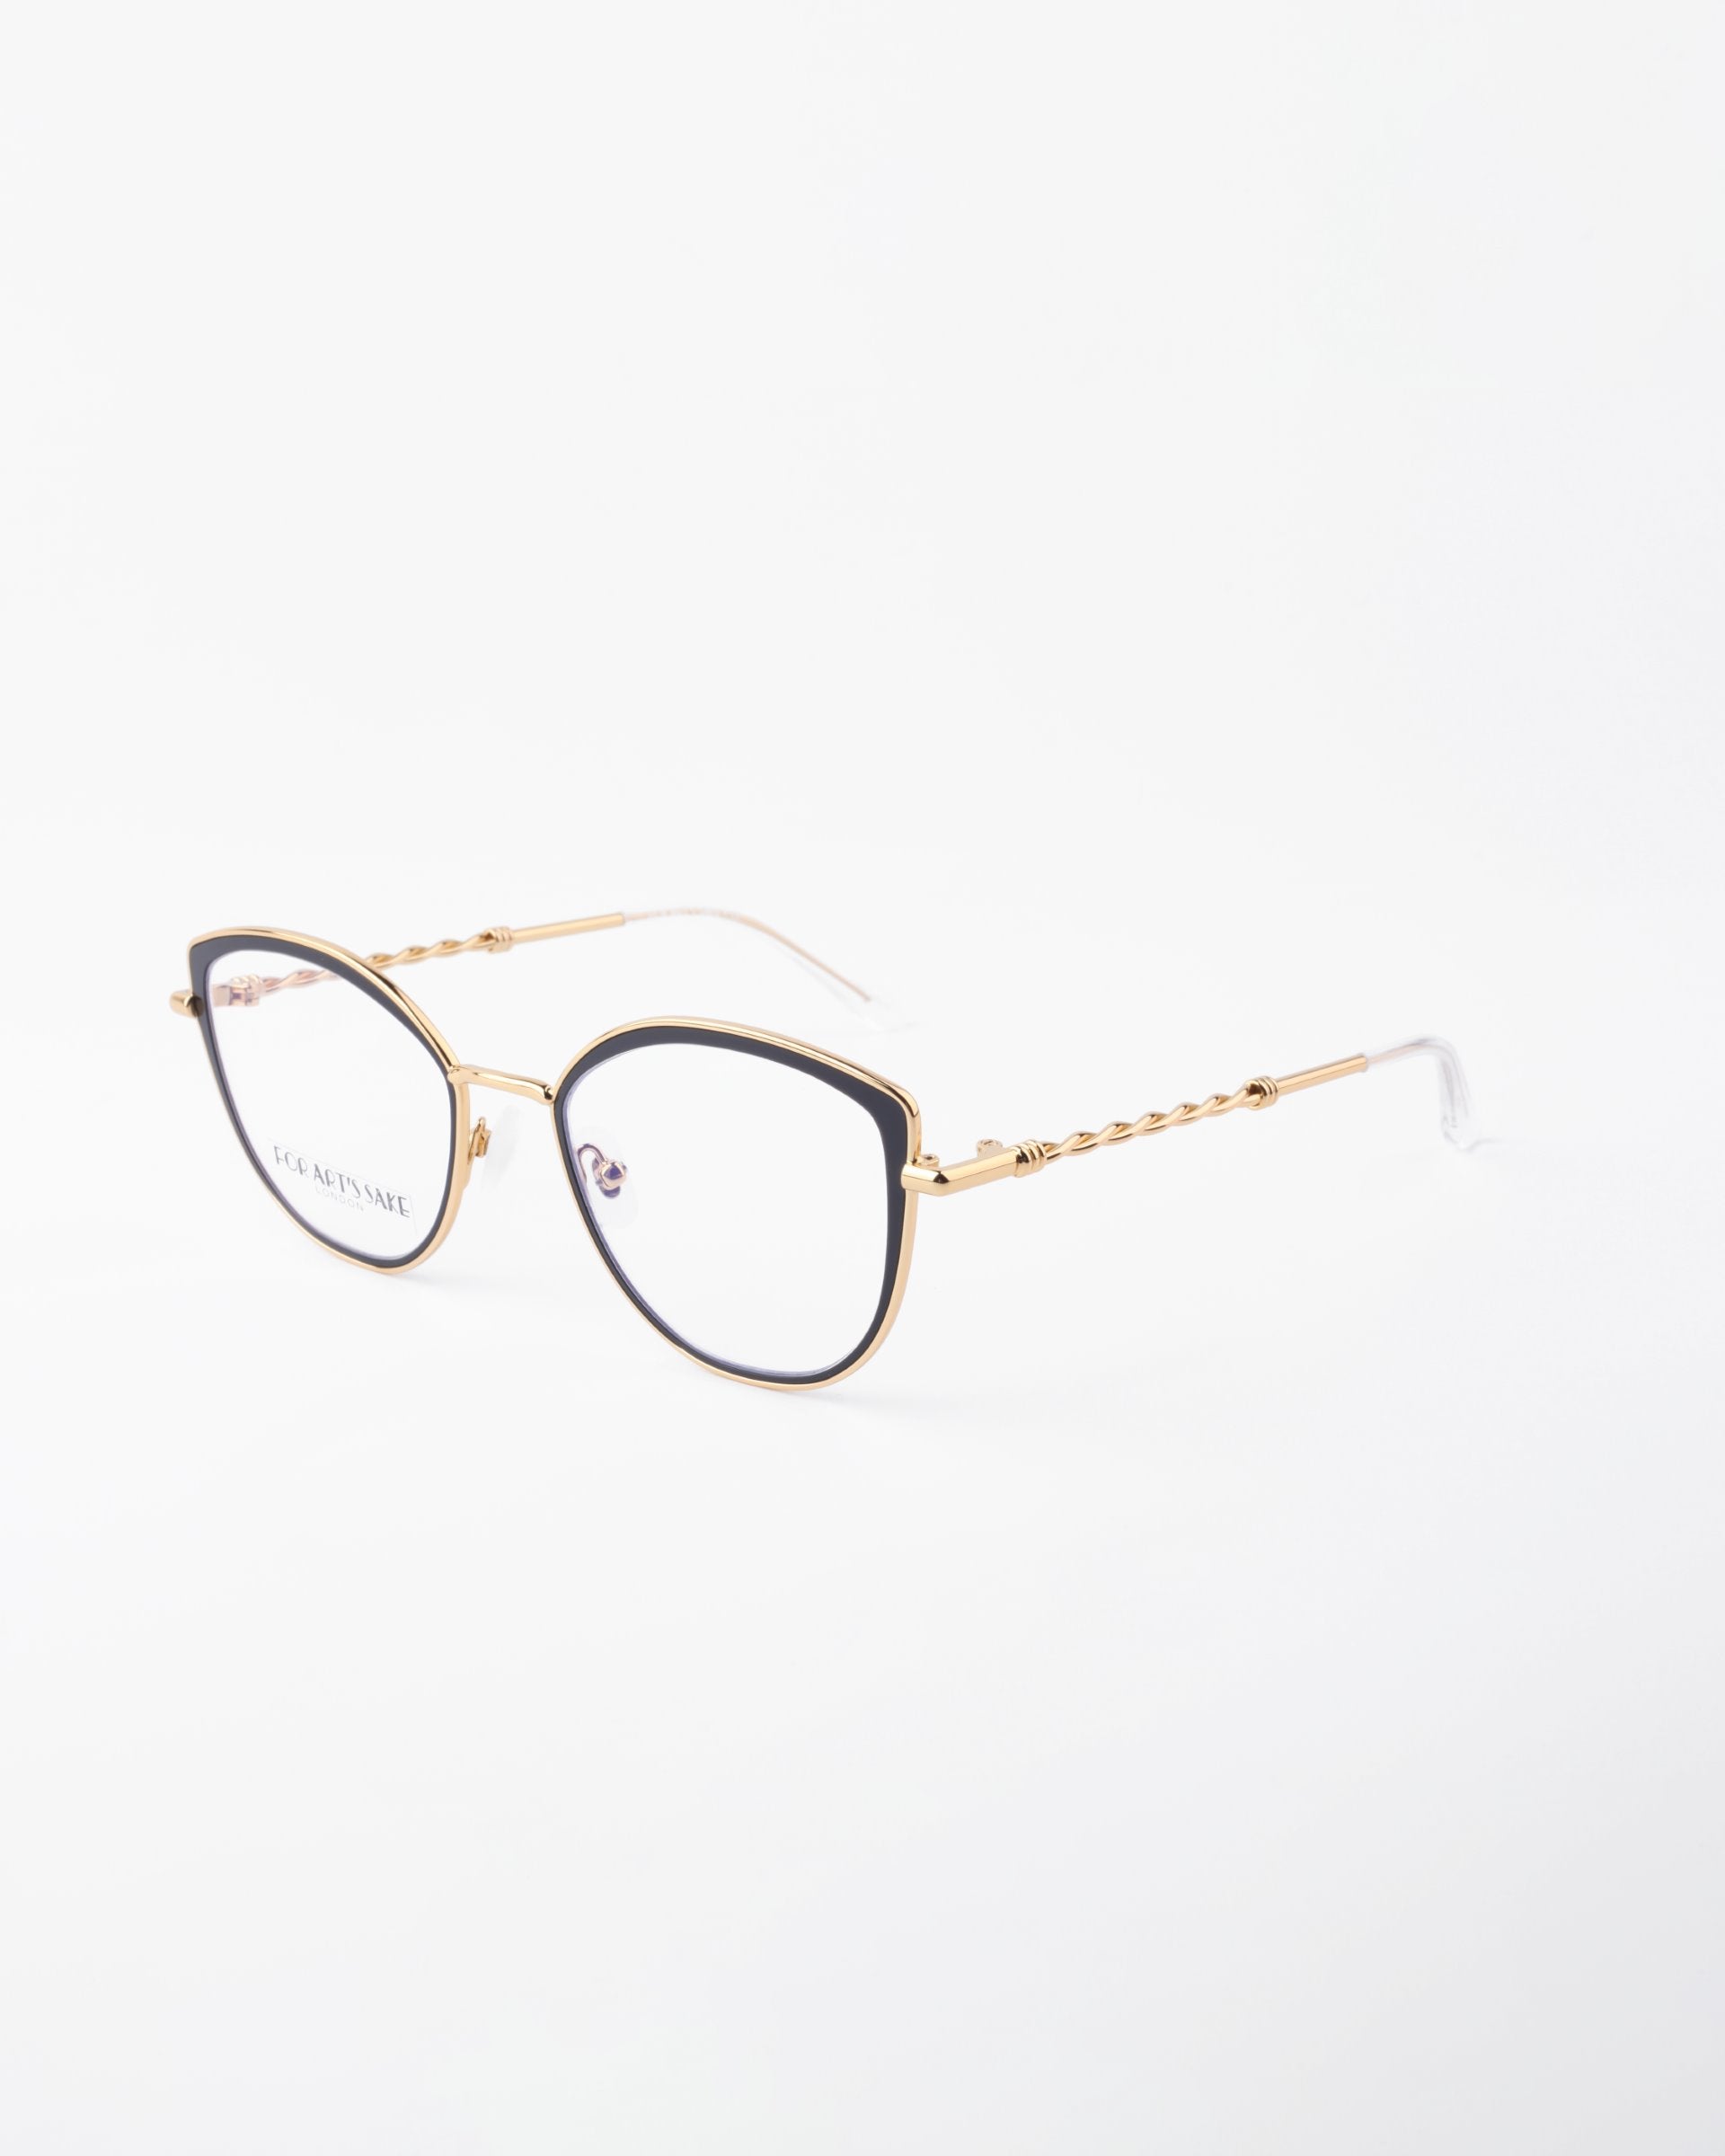 A pair of stylish eyeglasses with thin 18-karat gold-plated frames, black detailing around the lenses, and a twisted design on the earpieces. Featuring a Blue Light Filter, these For Art&#39;s Sake® Julie glasses are displayed on a white background and angled slightly to the left.